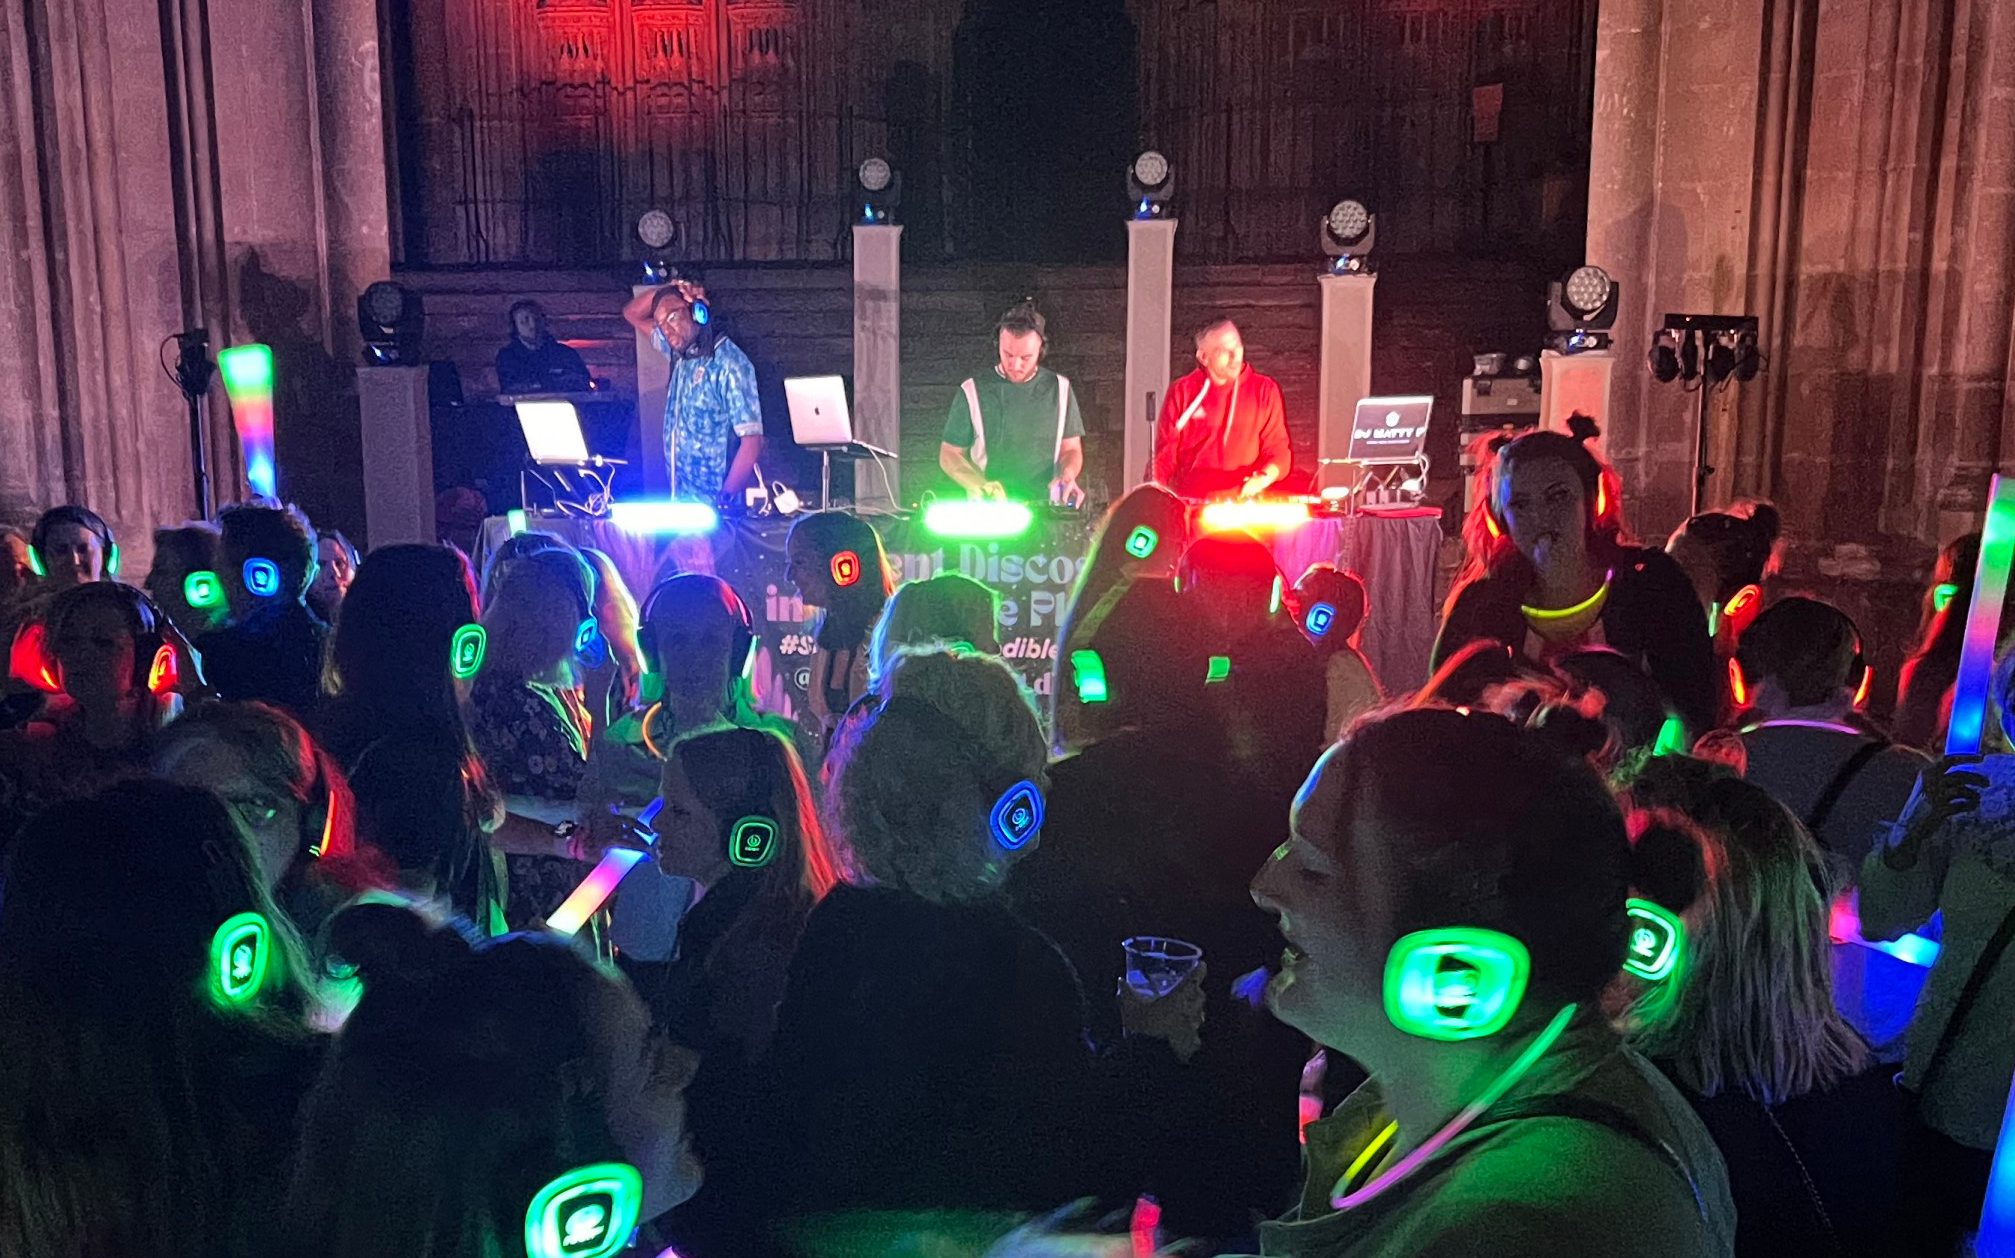 cathedrals host ‘rave in nave’ events to boost funds